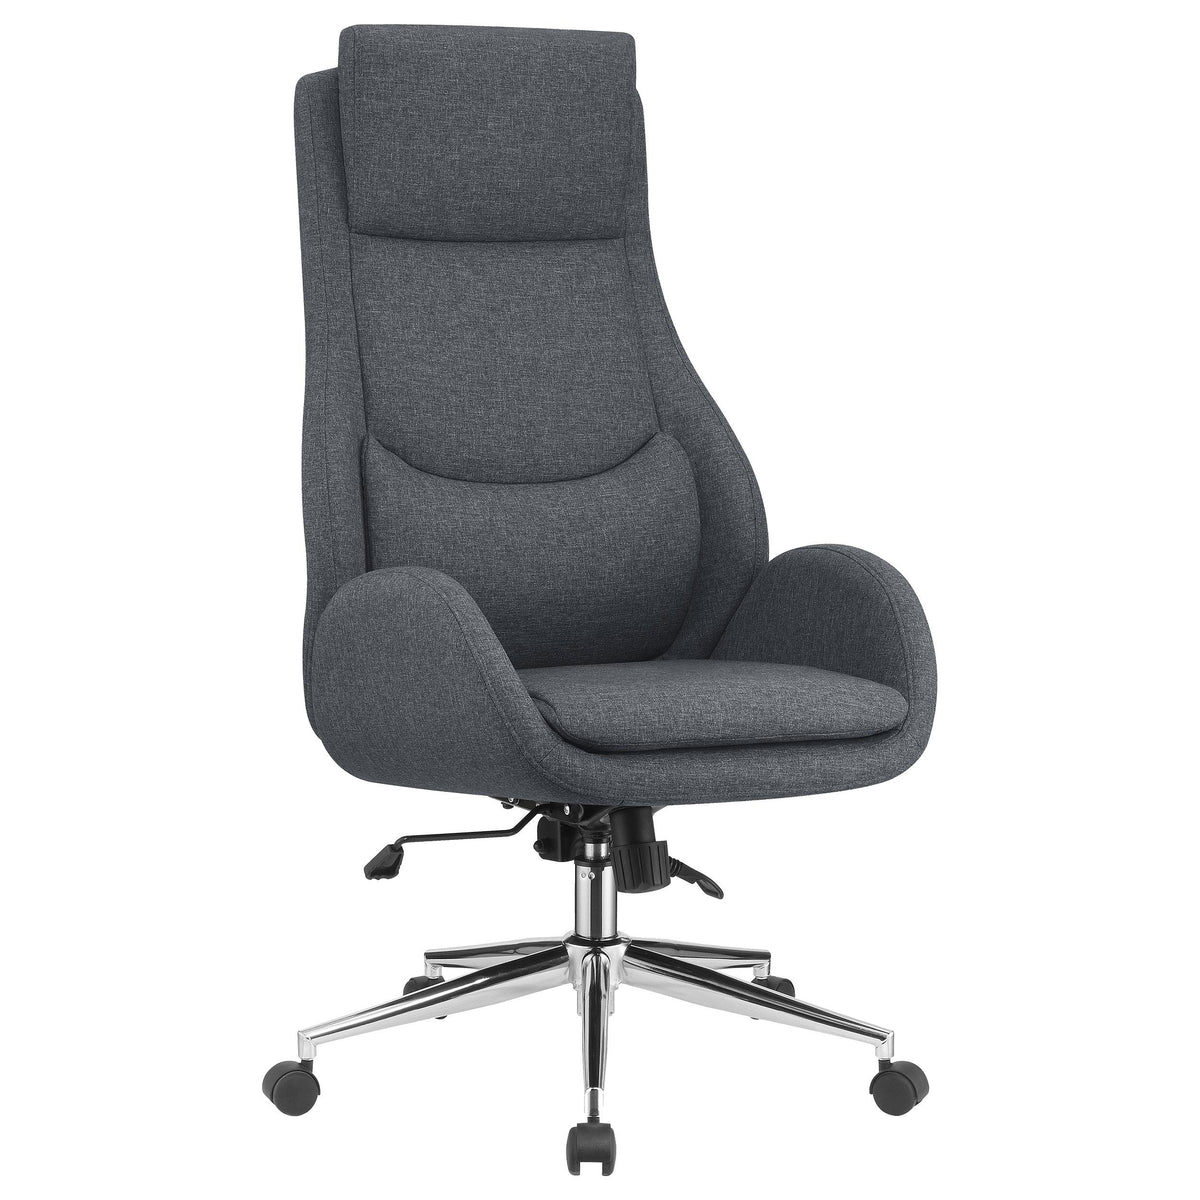 Cruz Upholstered Office Chair with Padded Seat Grey and Chrome  Las Vegas Furniture Stores